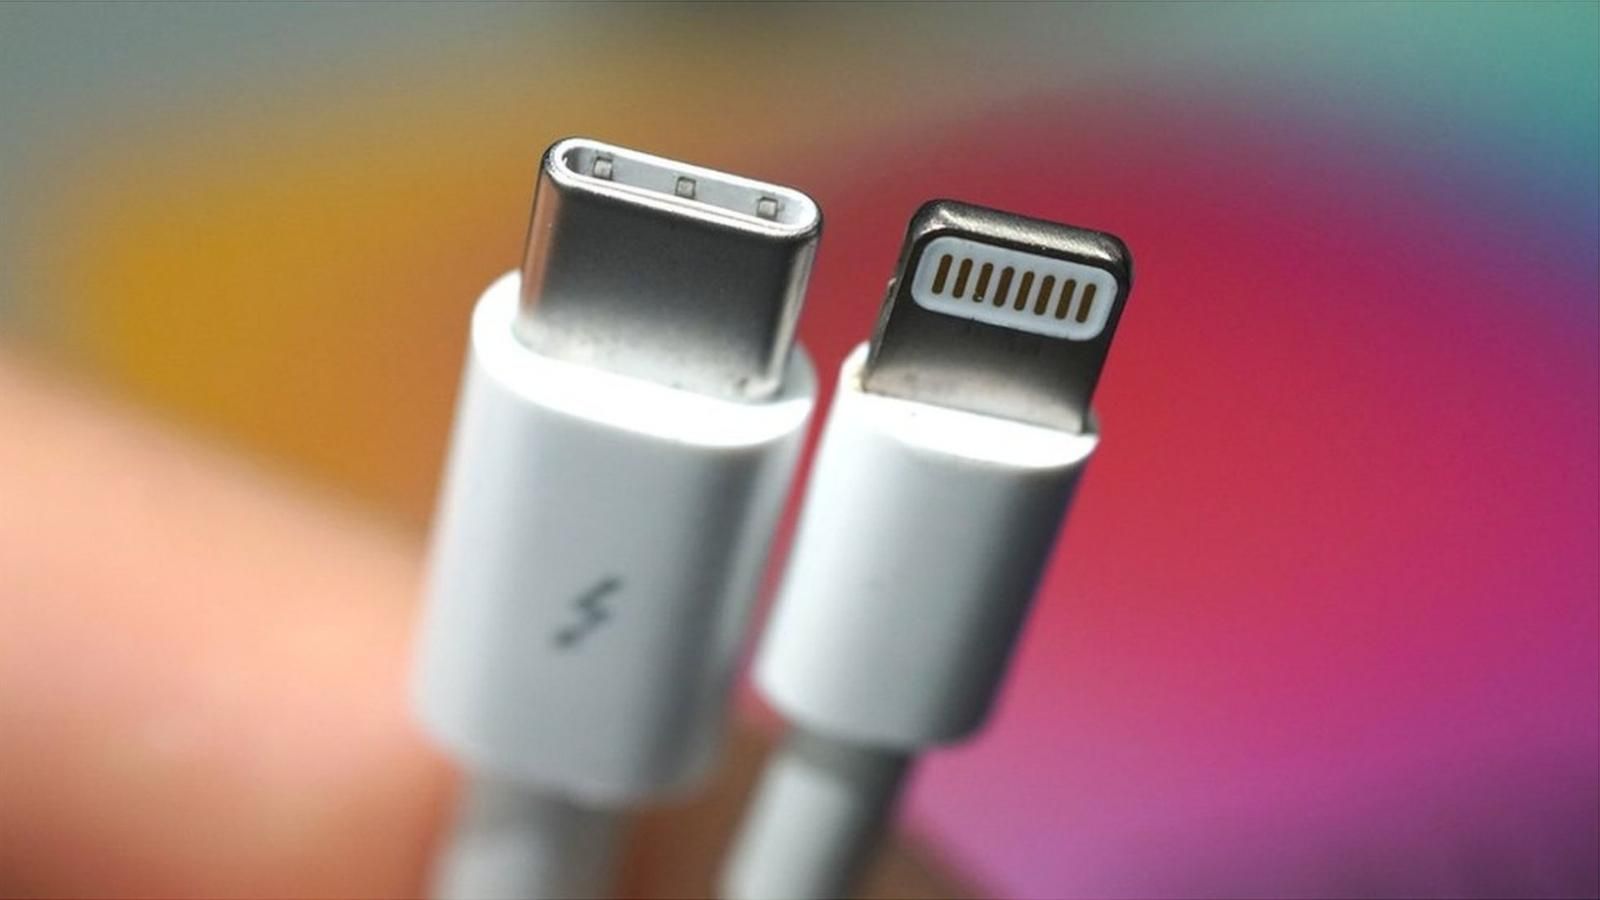 USB-C charged iPhones are coming, whether Apple likes it or not